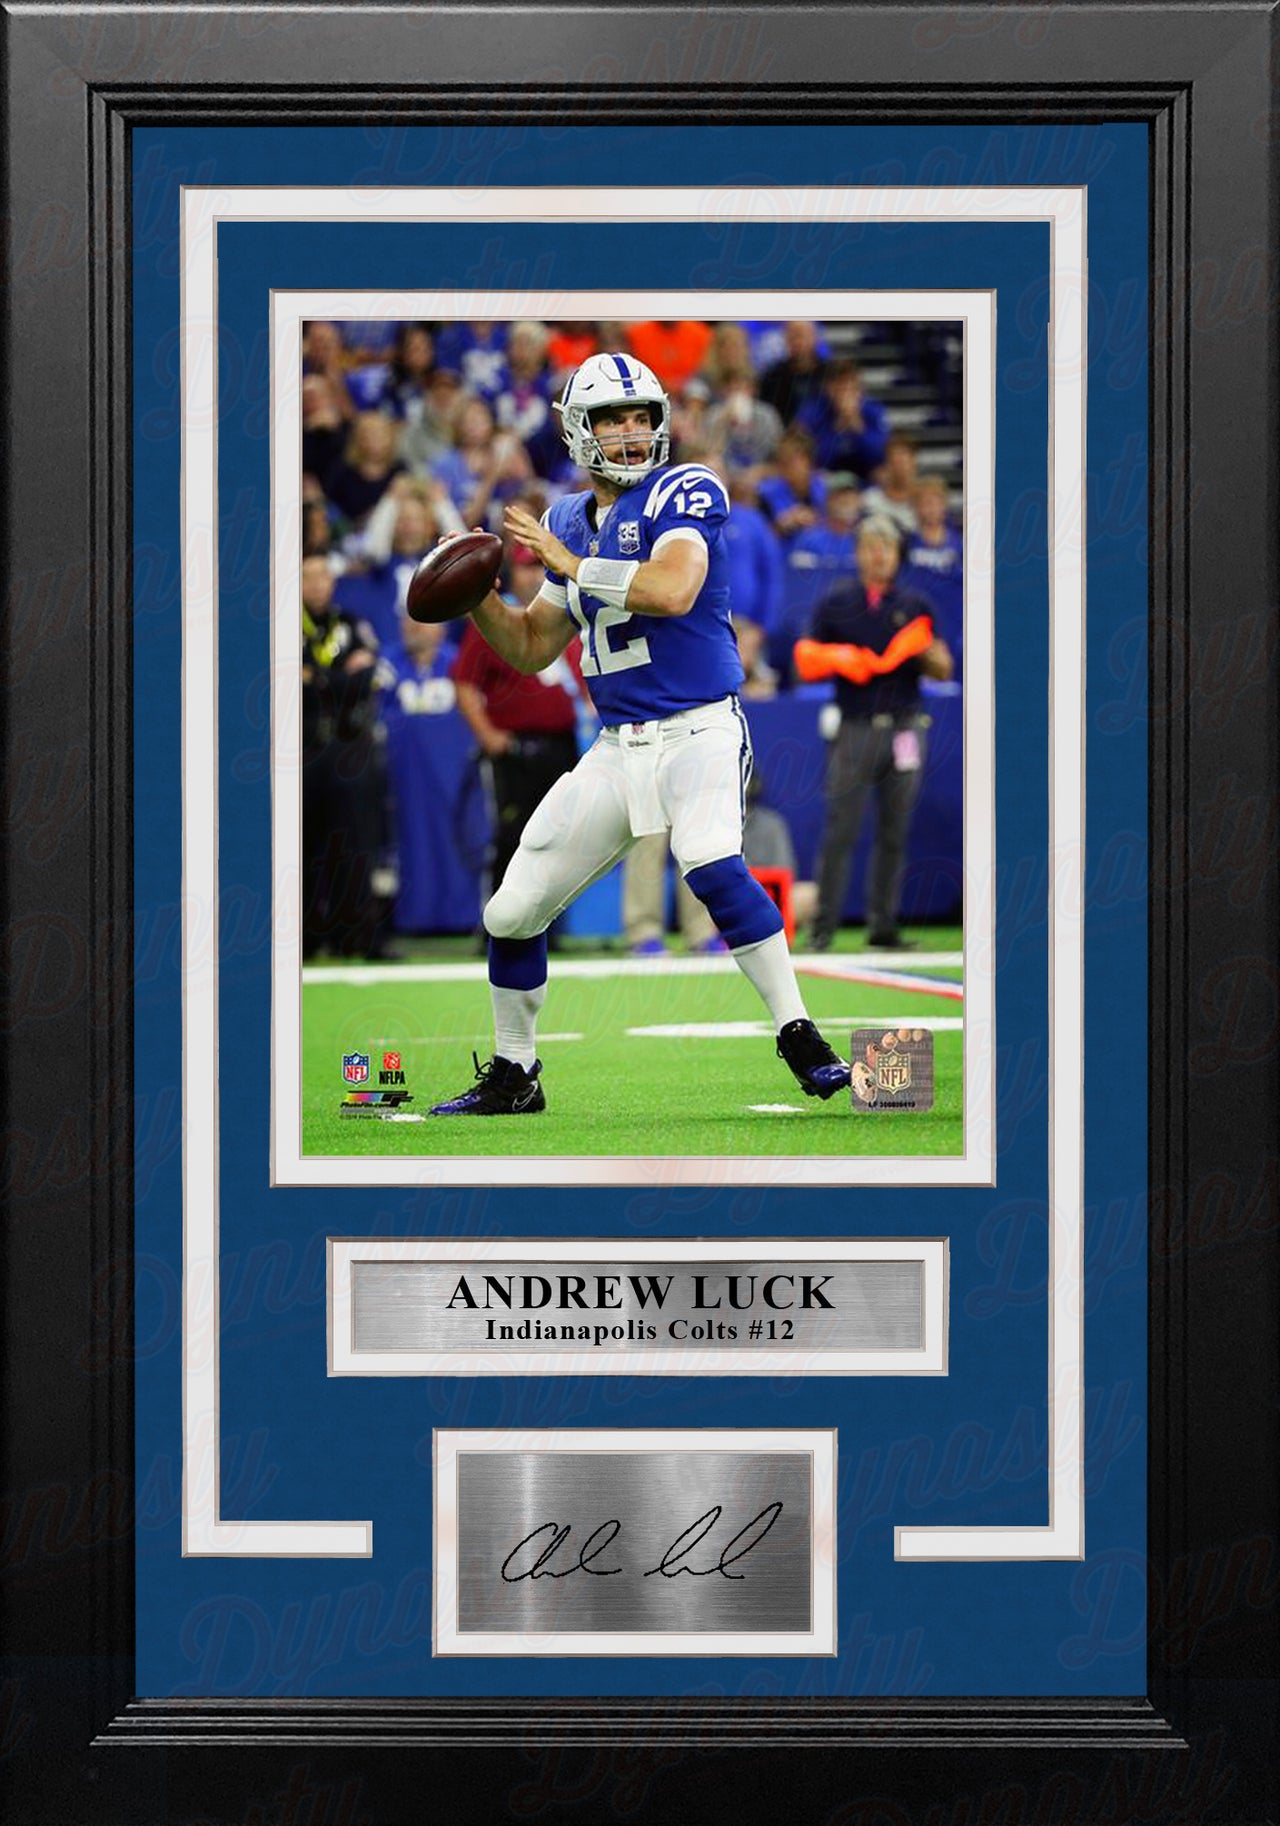 Andrew Luck in Action Indianapolis Colts 8" x 10" Framed Football Photo with Engraved Autograph